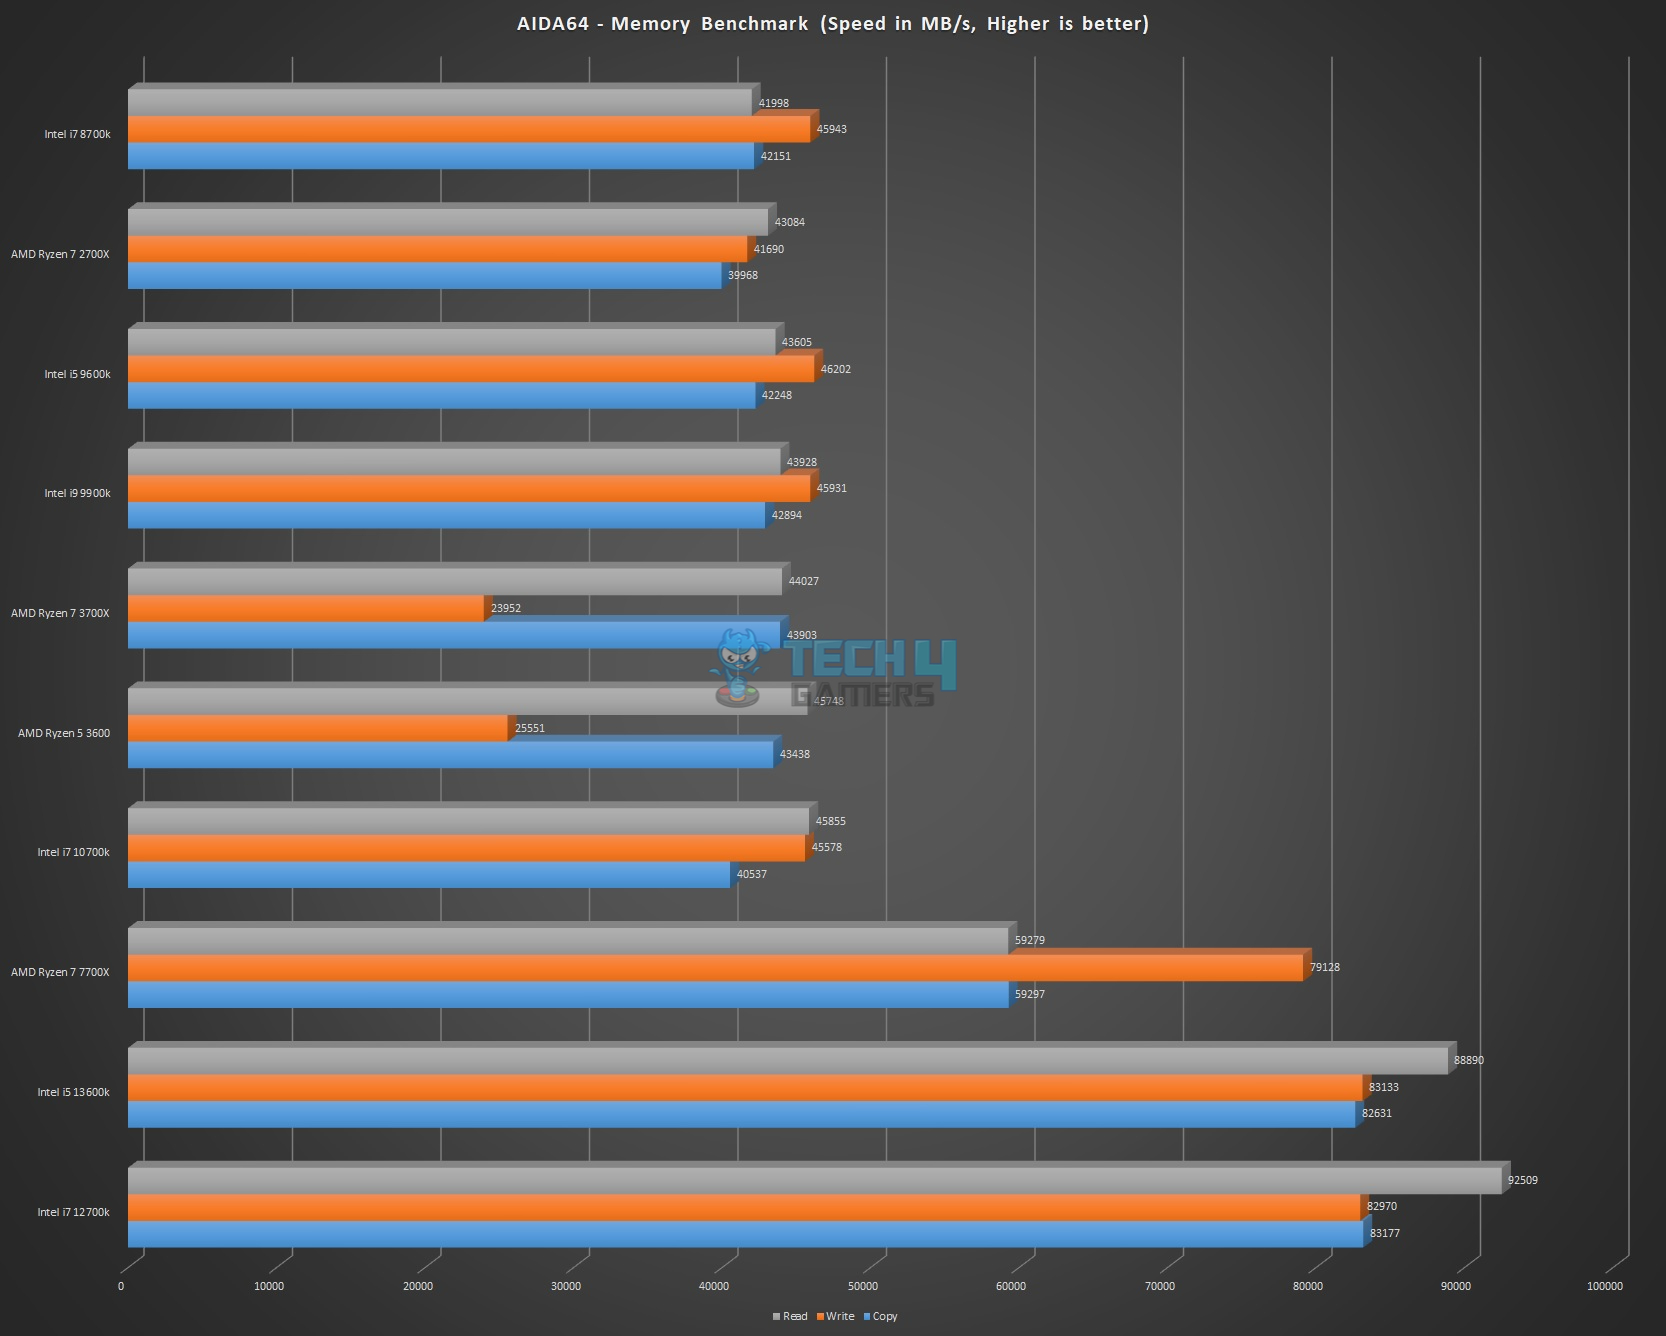 Memory Benchmarks for Core i5-13600K